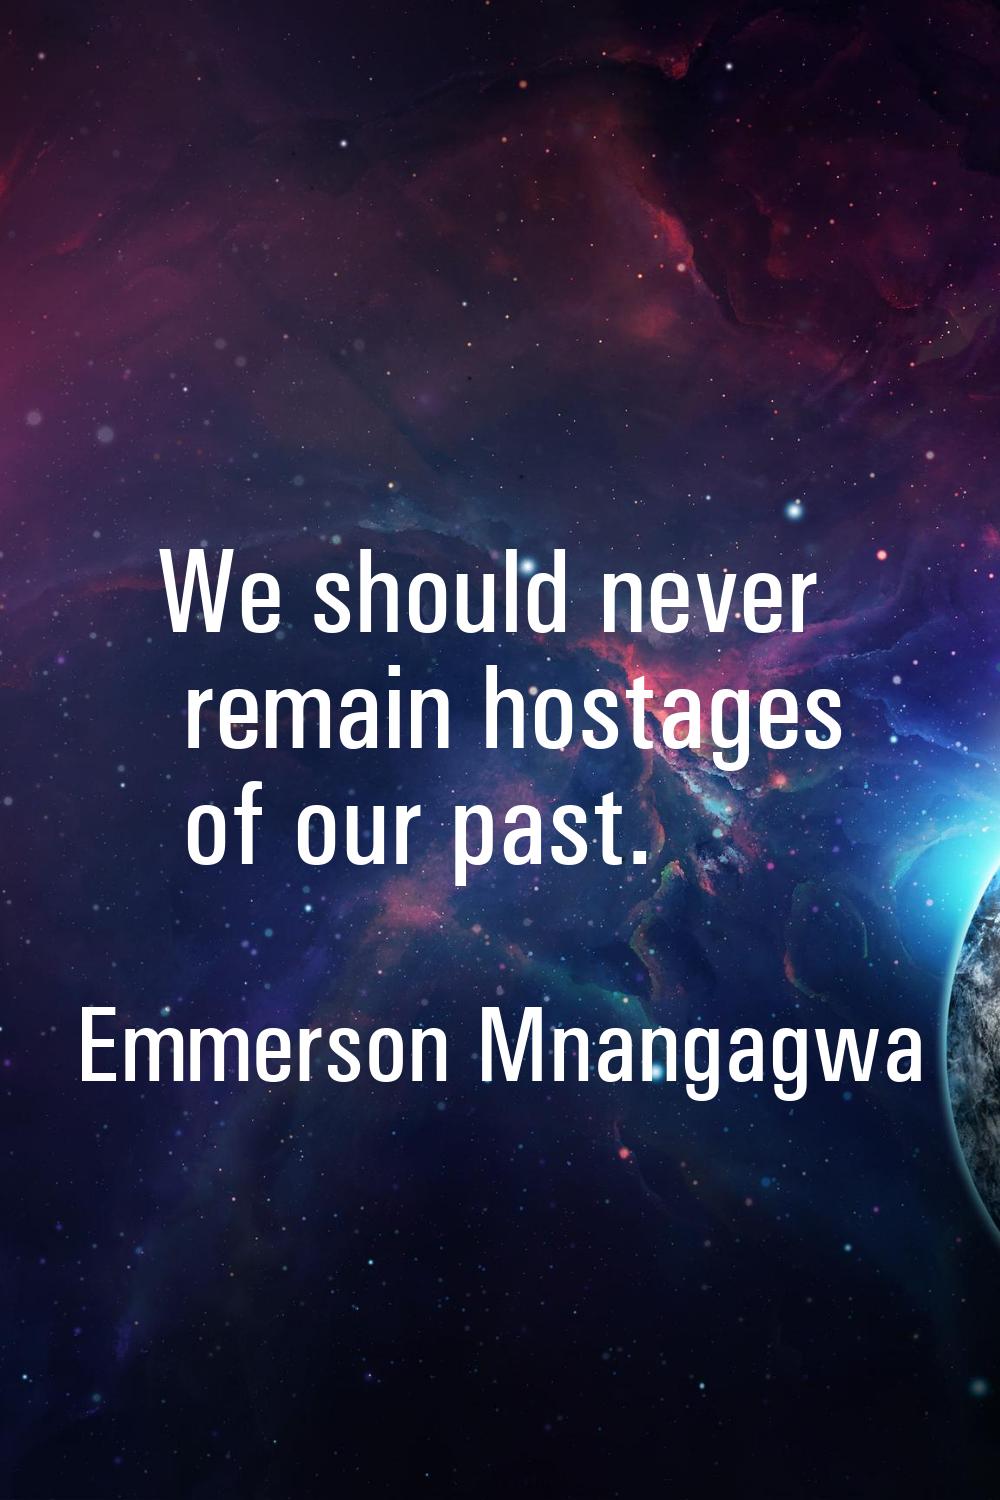 We should never remain hostages of our past.